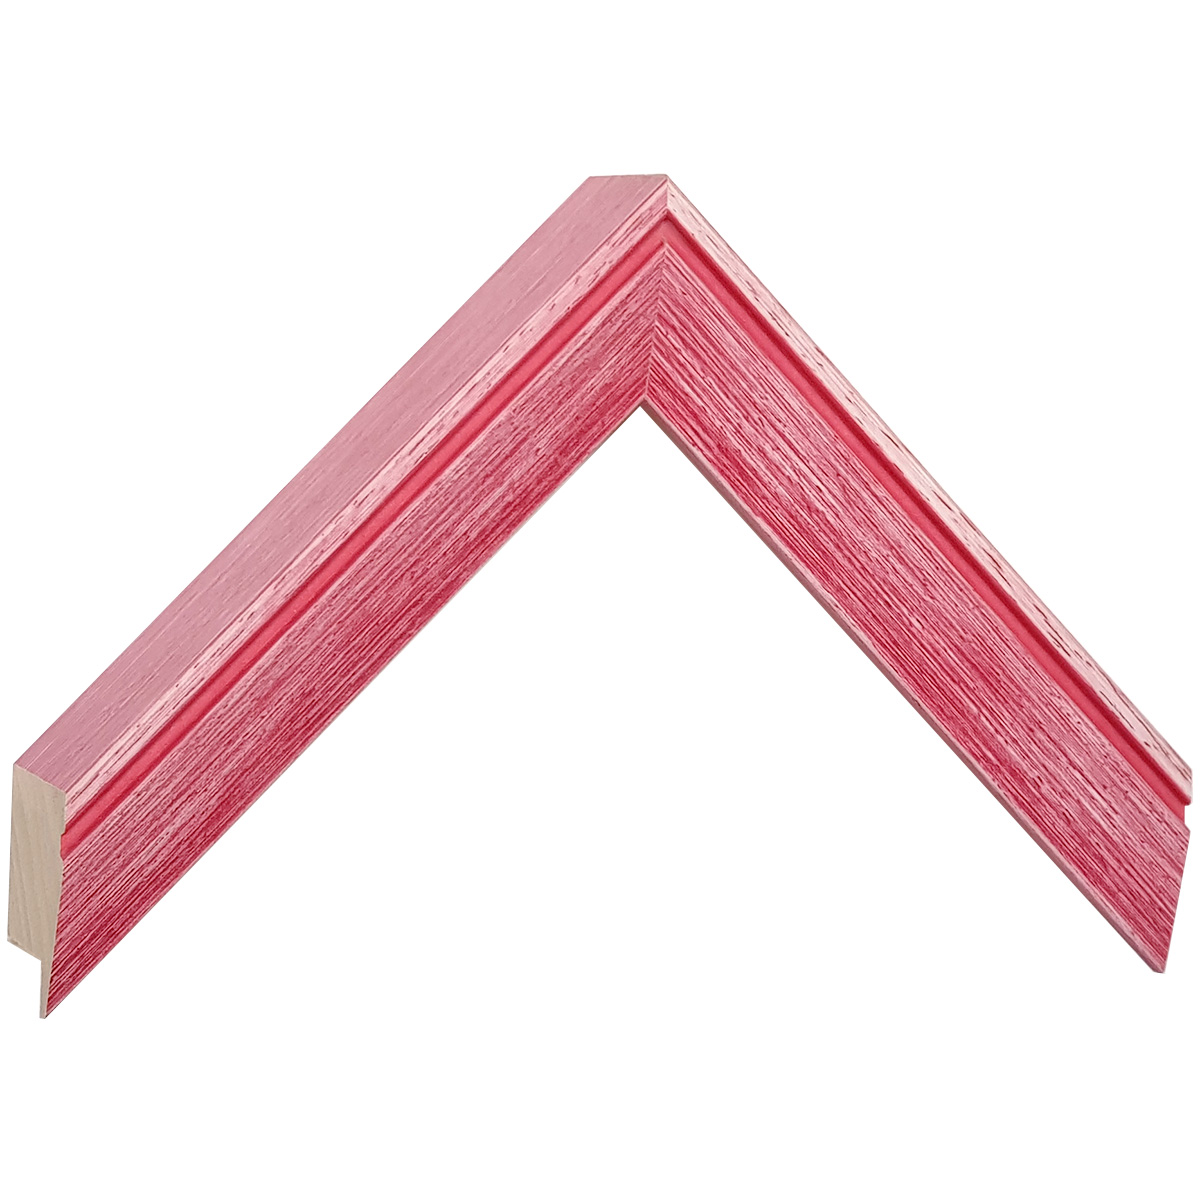 Moulding ayous, height 22mm width 19 - Pink - Sample